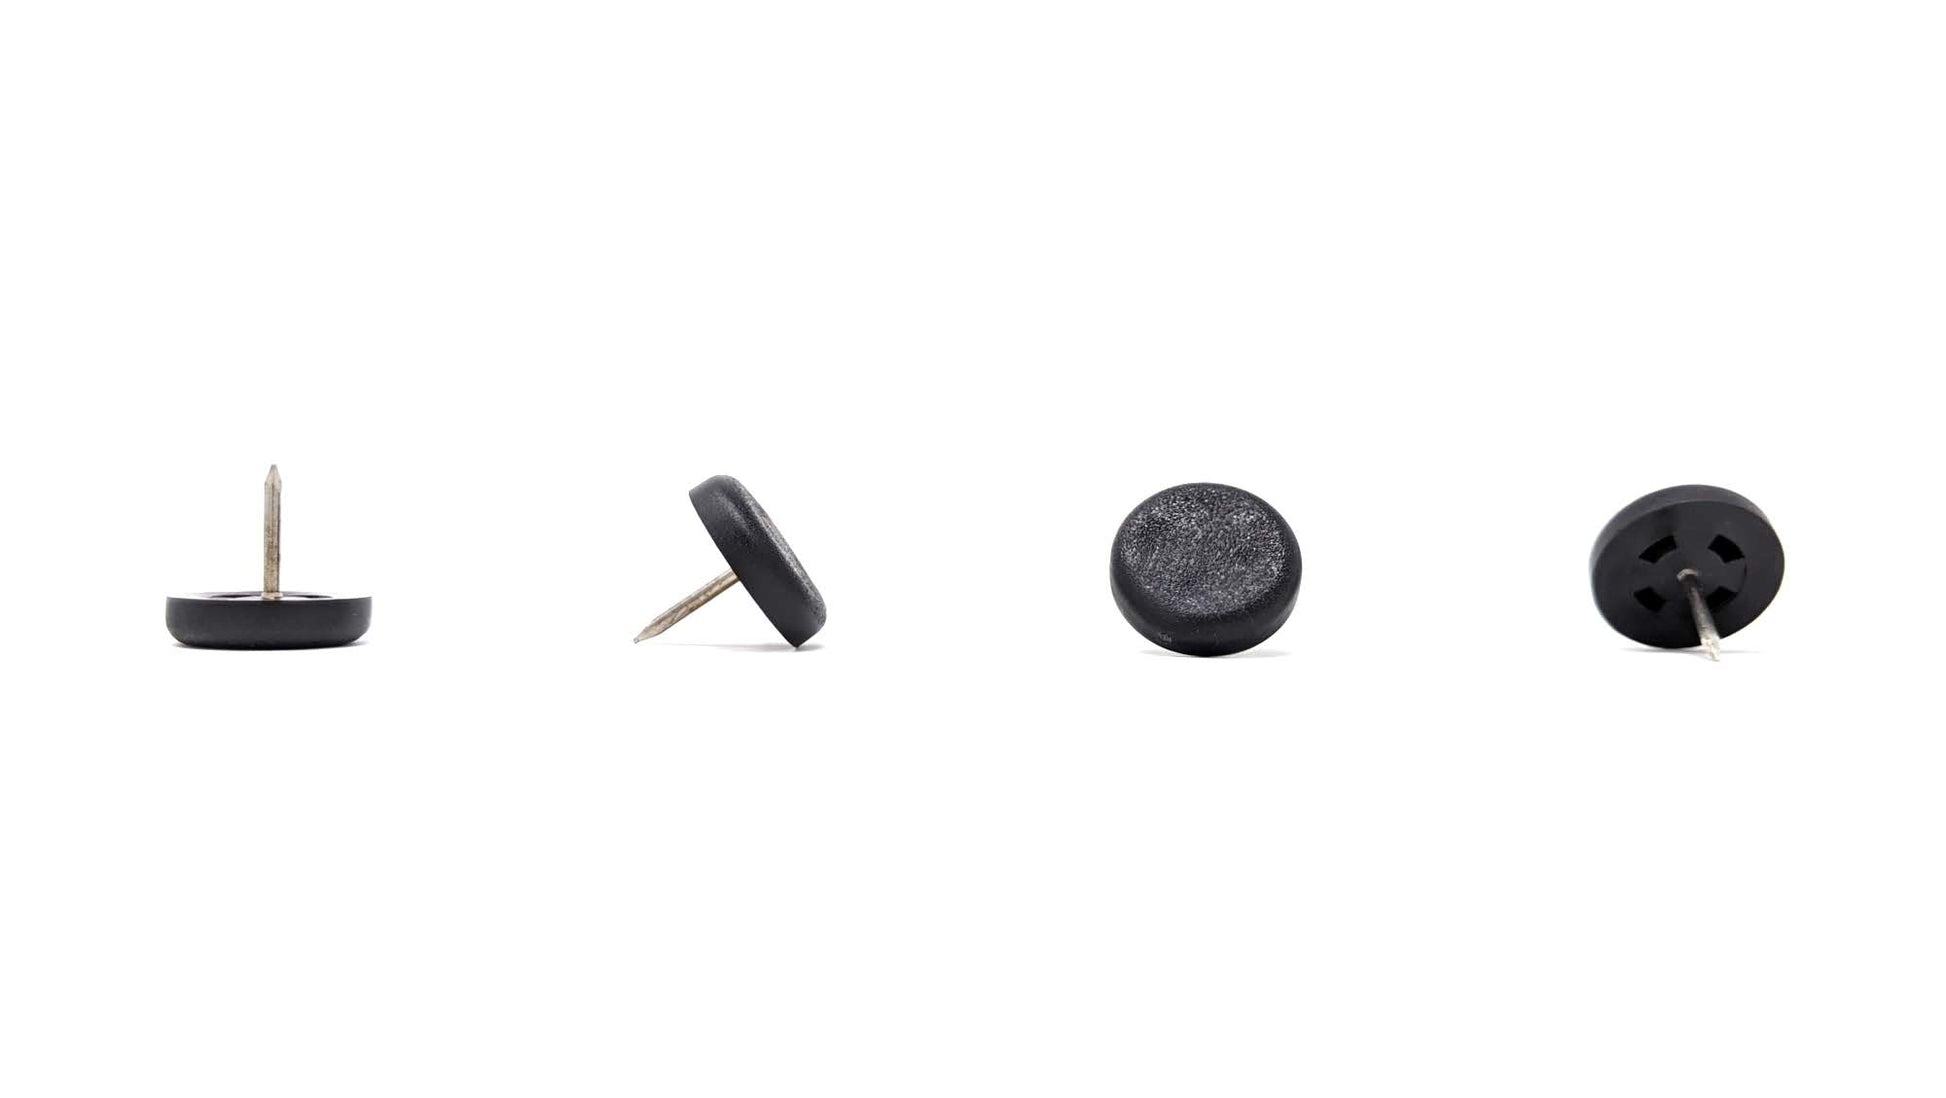 22mm Black Plastic Nail On Gliders - Made in Germany - Keay Vital Parts